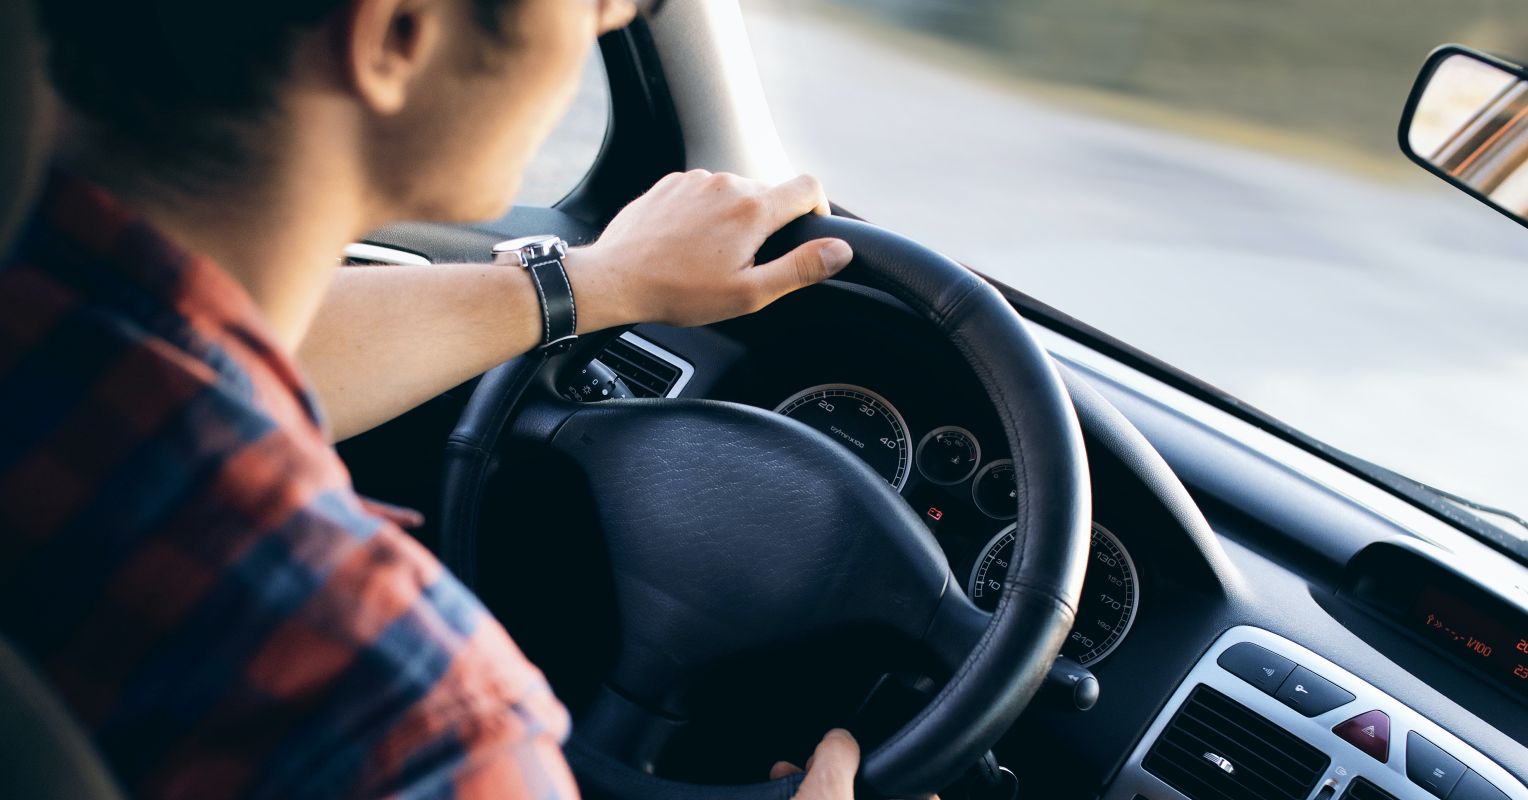 Strategies to Help Your ADHD Teen Be a Safe Driver